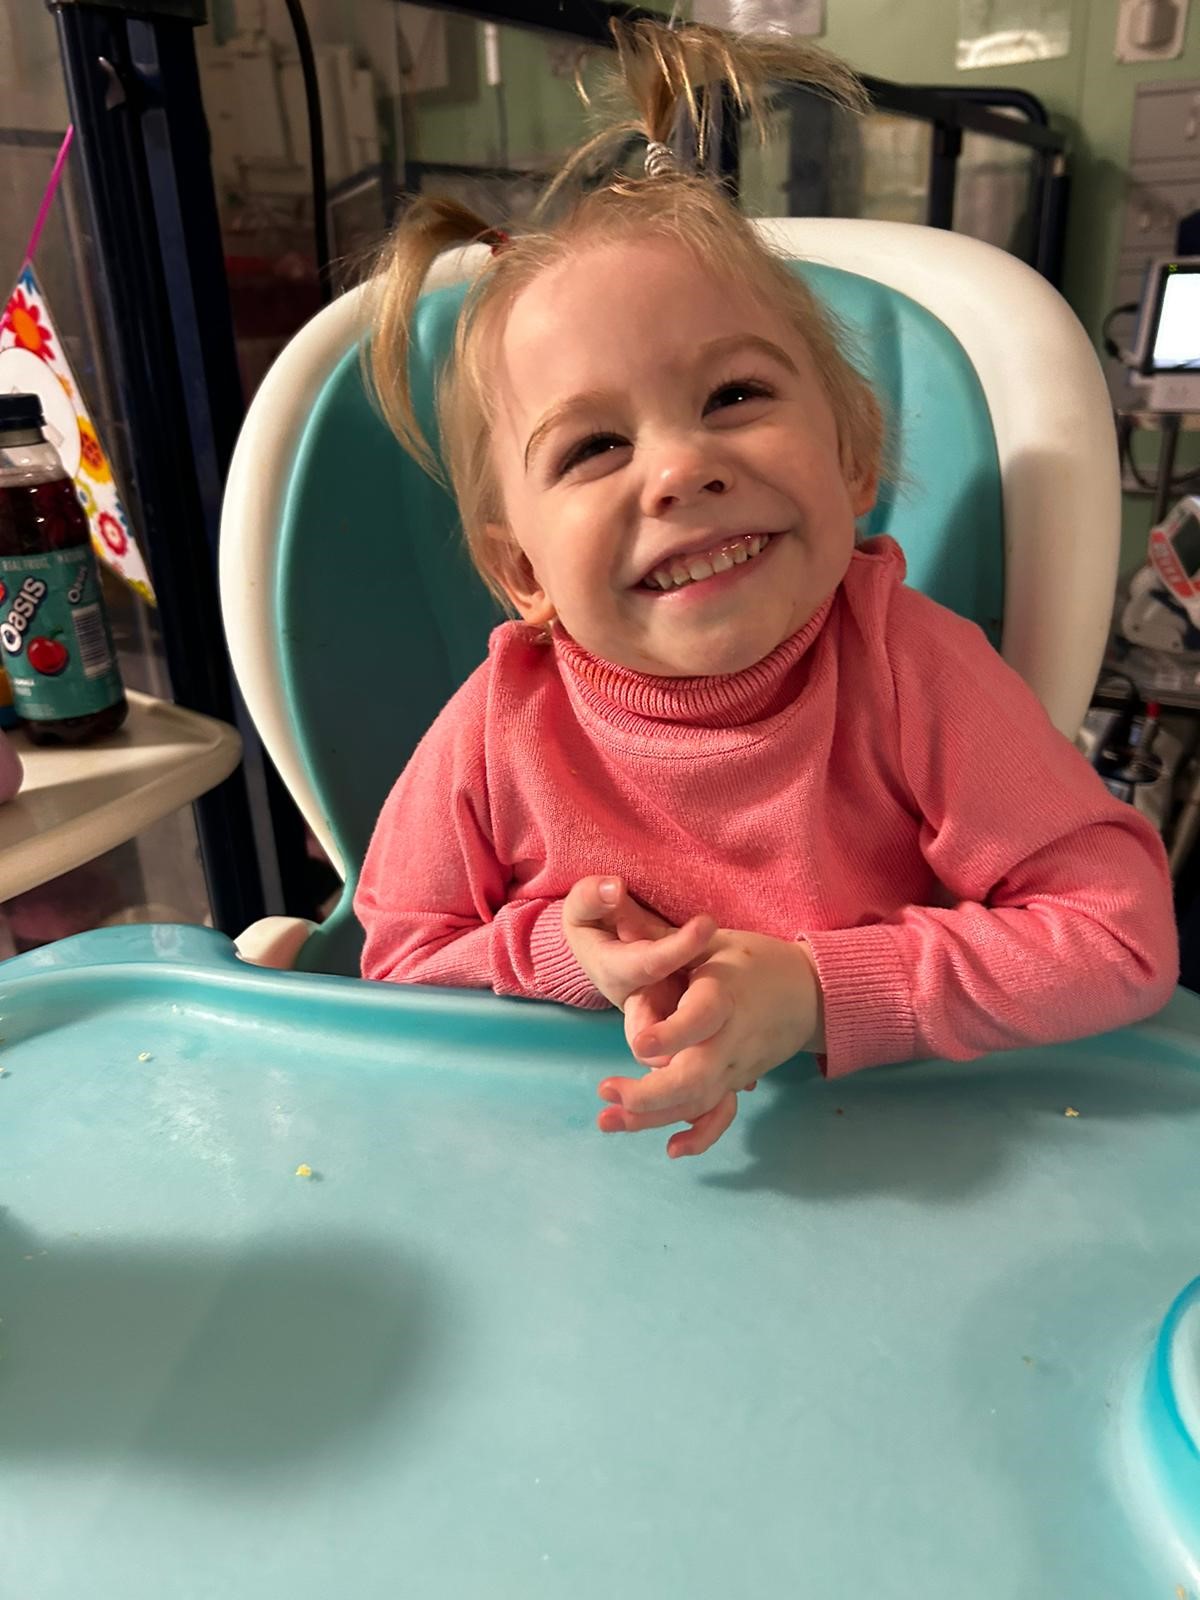 Amelia sitting in a high chair wearing a pink top and smiling at the camera 